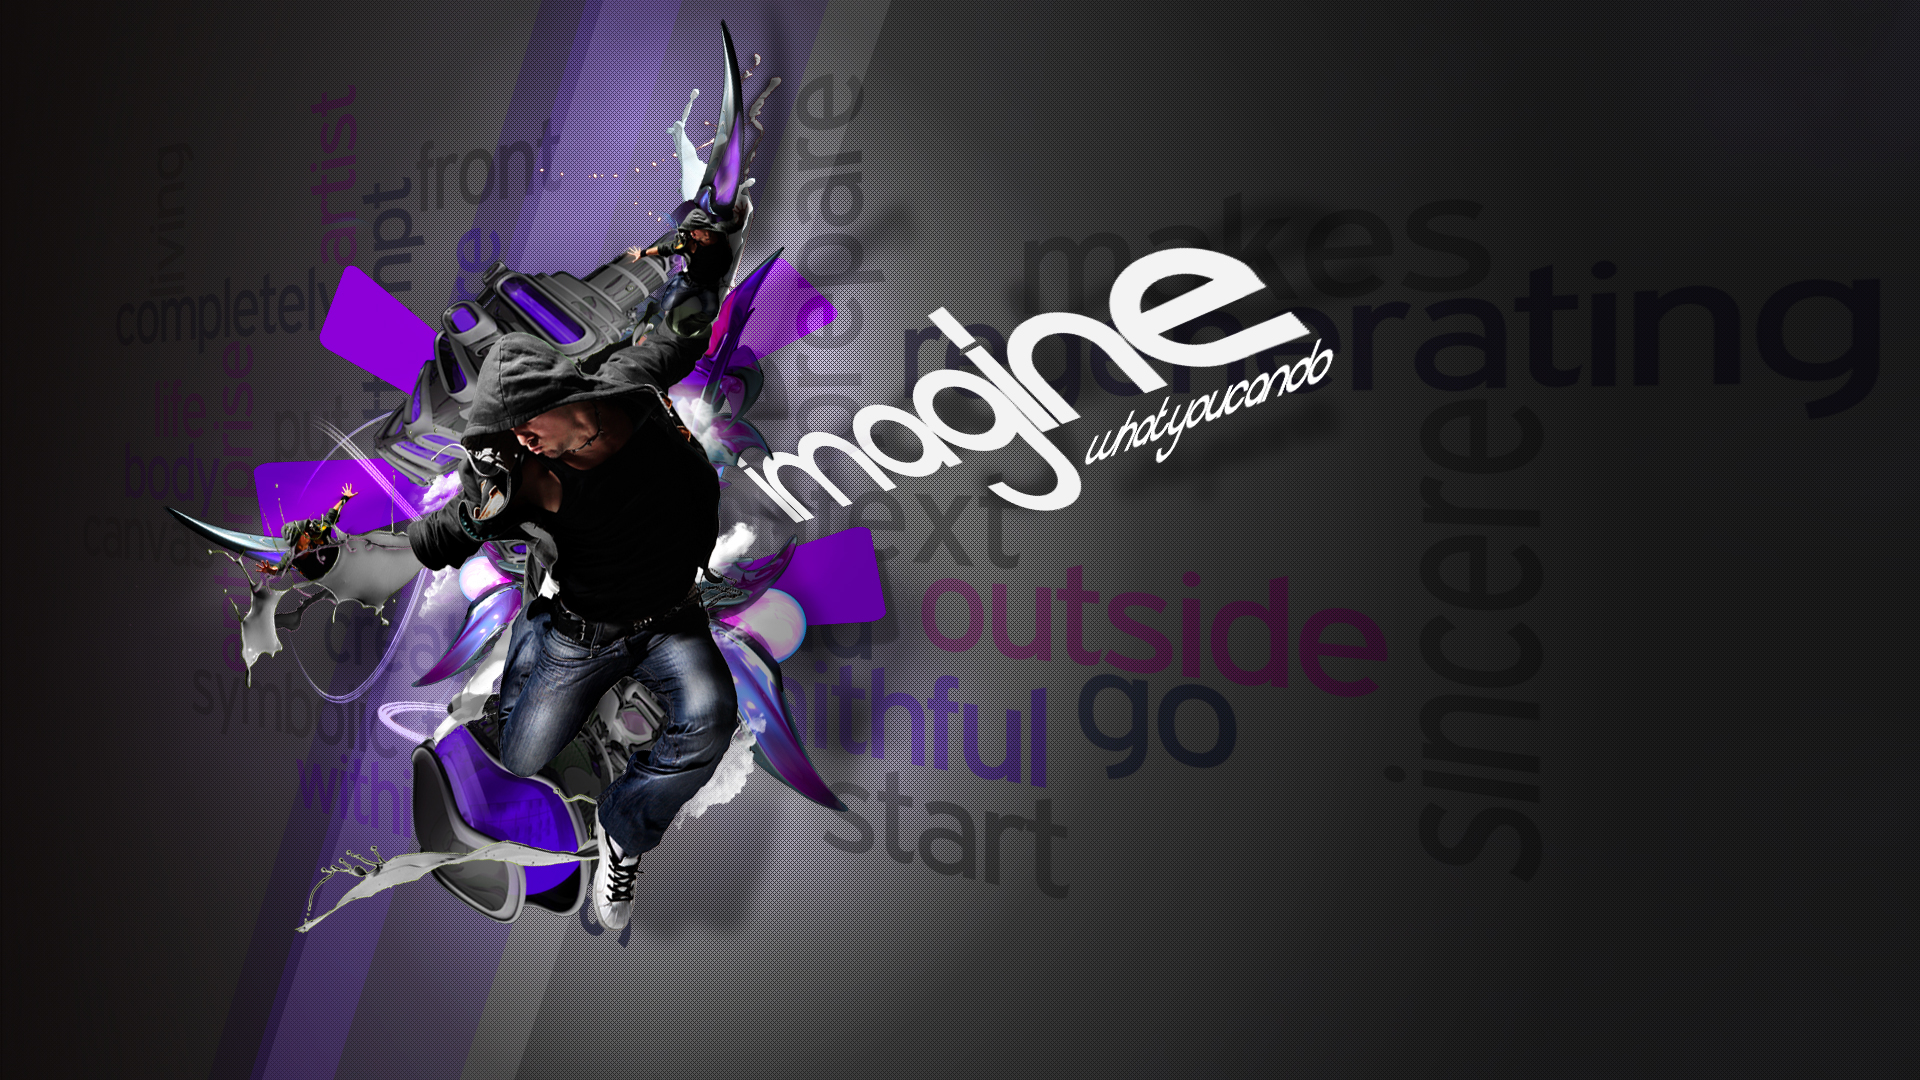 awesome wallpapers for guys,graphic design,purple,violet,text,font